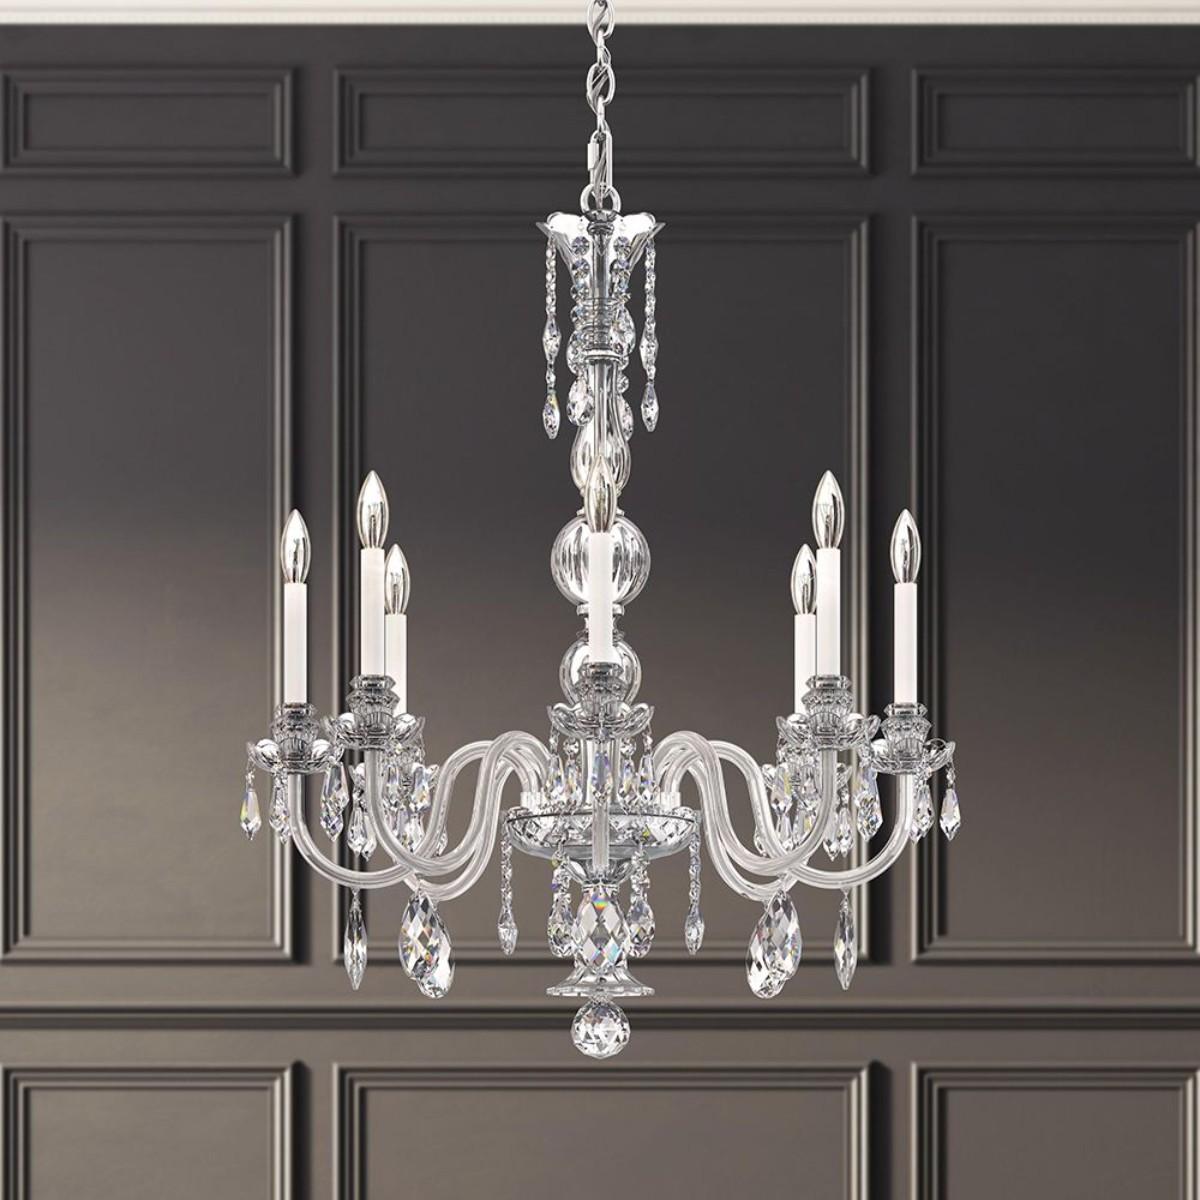 Hamilton Nouveau 8 Light Silver Chandelier with Clear Heritage Crystals